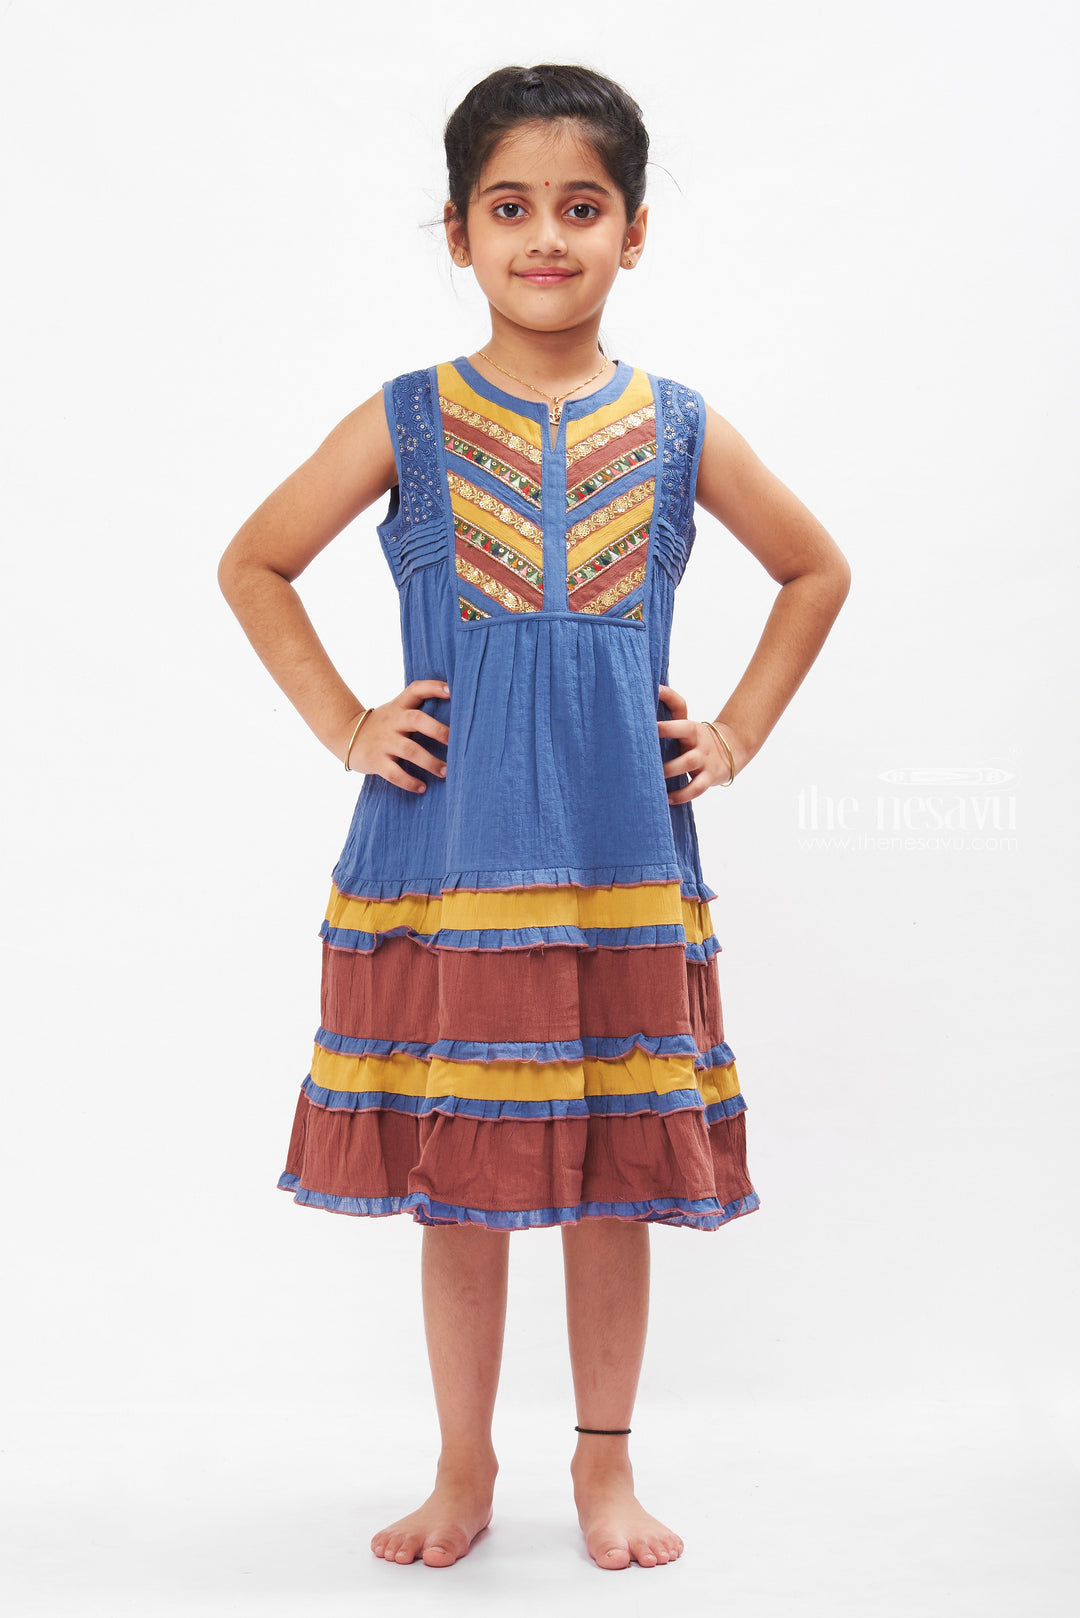 The Nesavu Girls Cotton Frock Rustic Charm Layered Cotton Frock with Ethnic Accents for Girls Nesavu 22 (4Y) / Blue / Cotton GFC1246B-22 Girls Ethnic Cotton Summer Dresses | Layered Ruffle Cotton Frock | The Nesavu